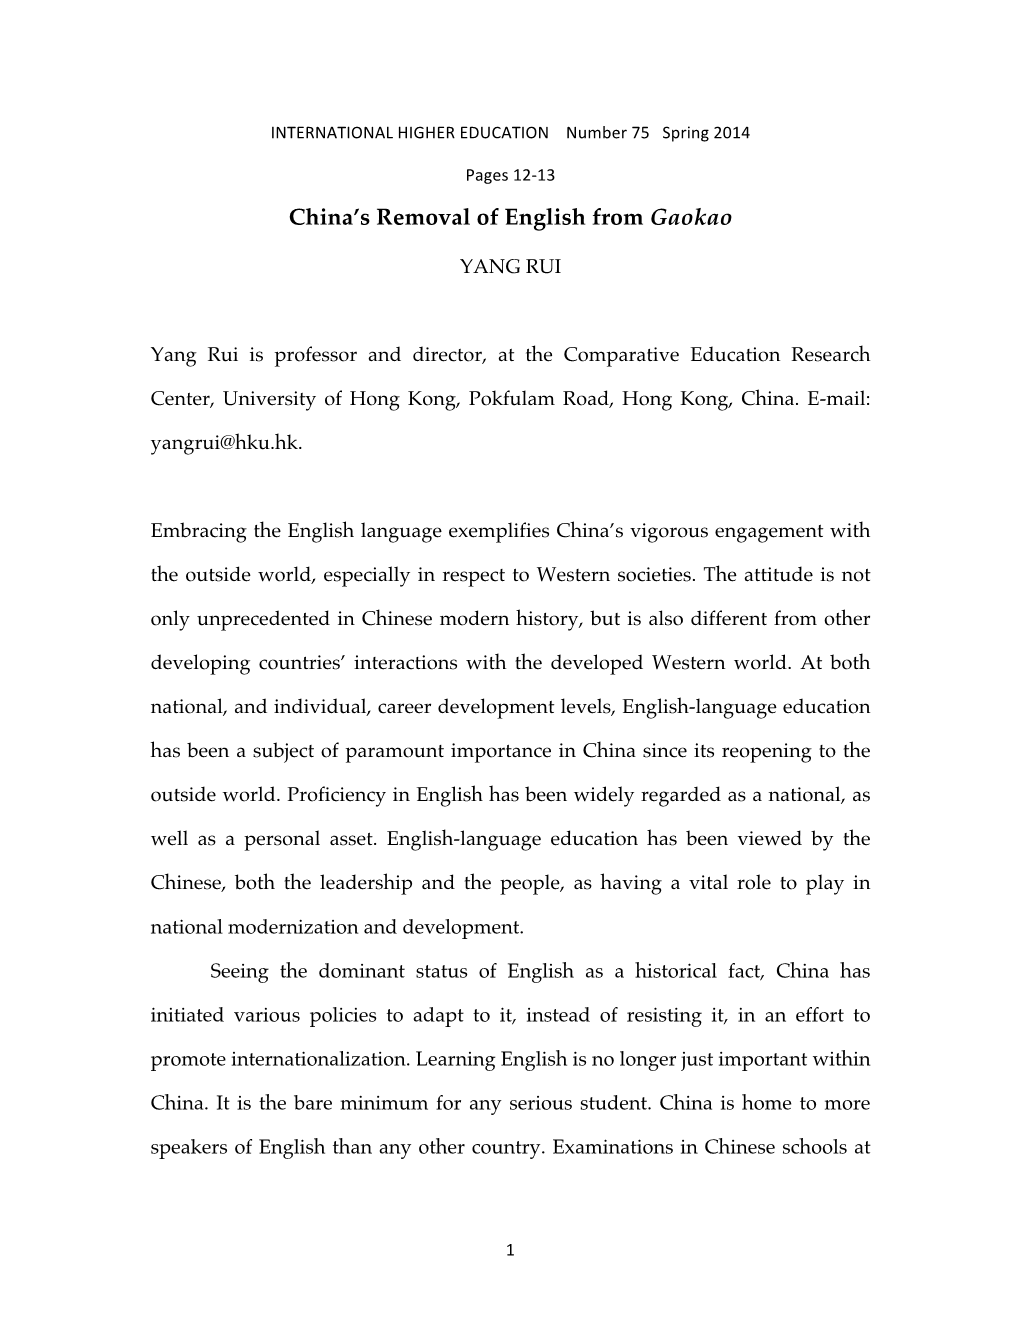 China's Removal of English from Gaokao